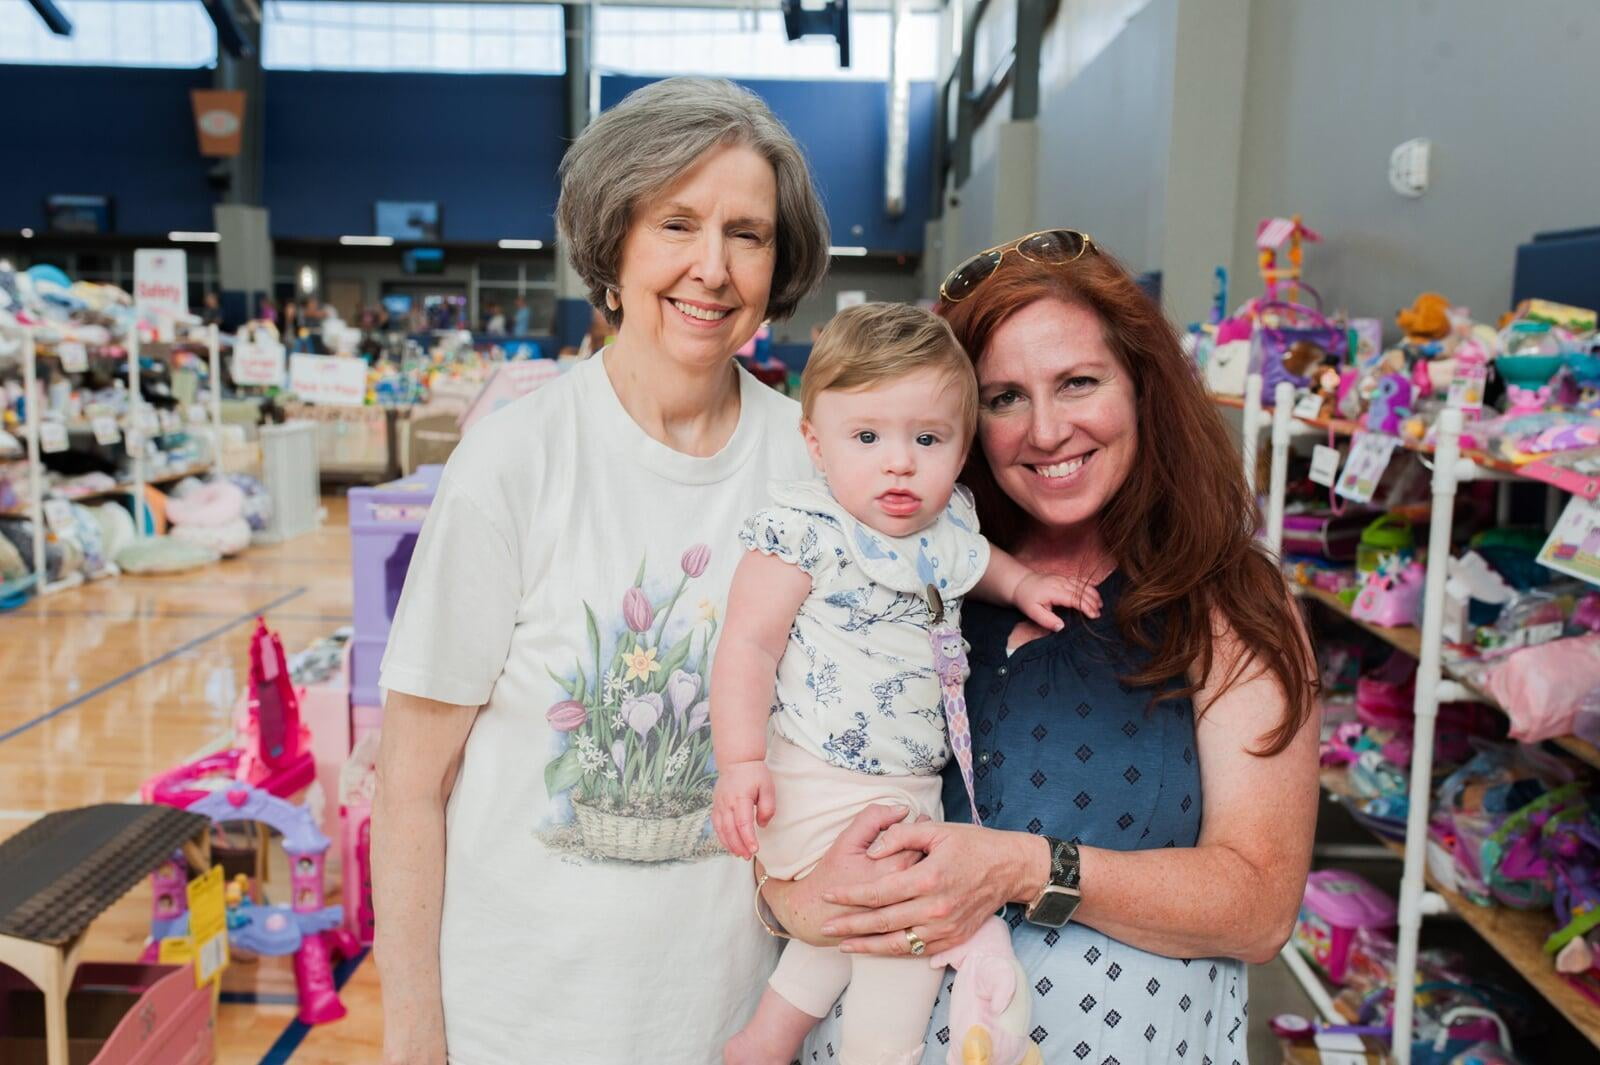 A young JBF shopper mom is holding her toddler while standing next to her child's grandmother at their local JBF sale. The background has racks of colorful toys.